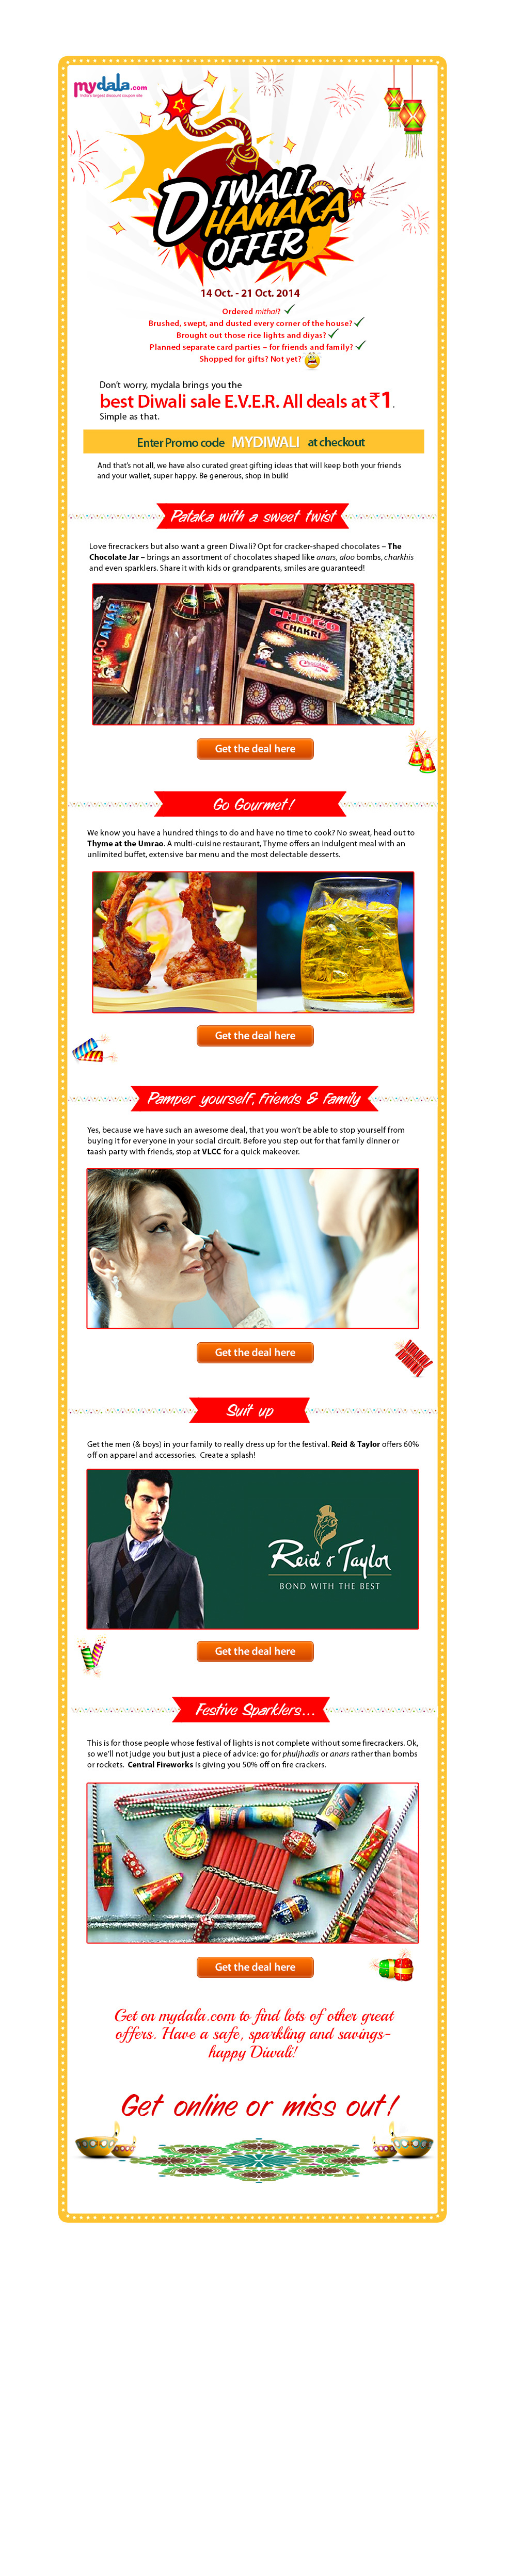 Email campaign